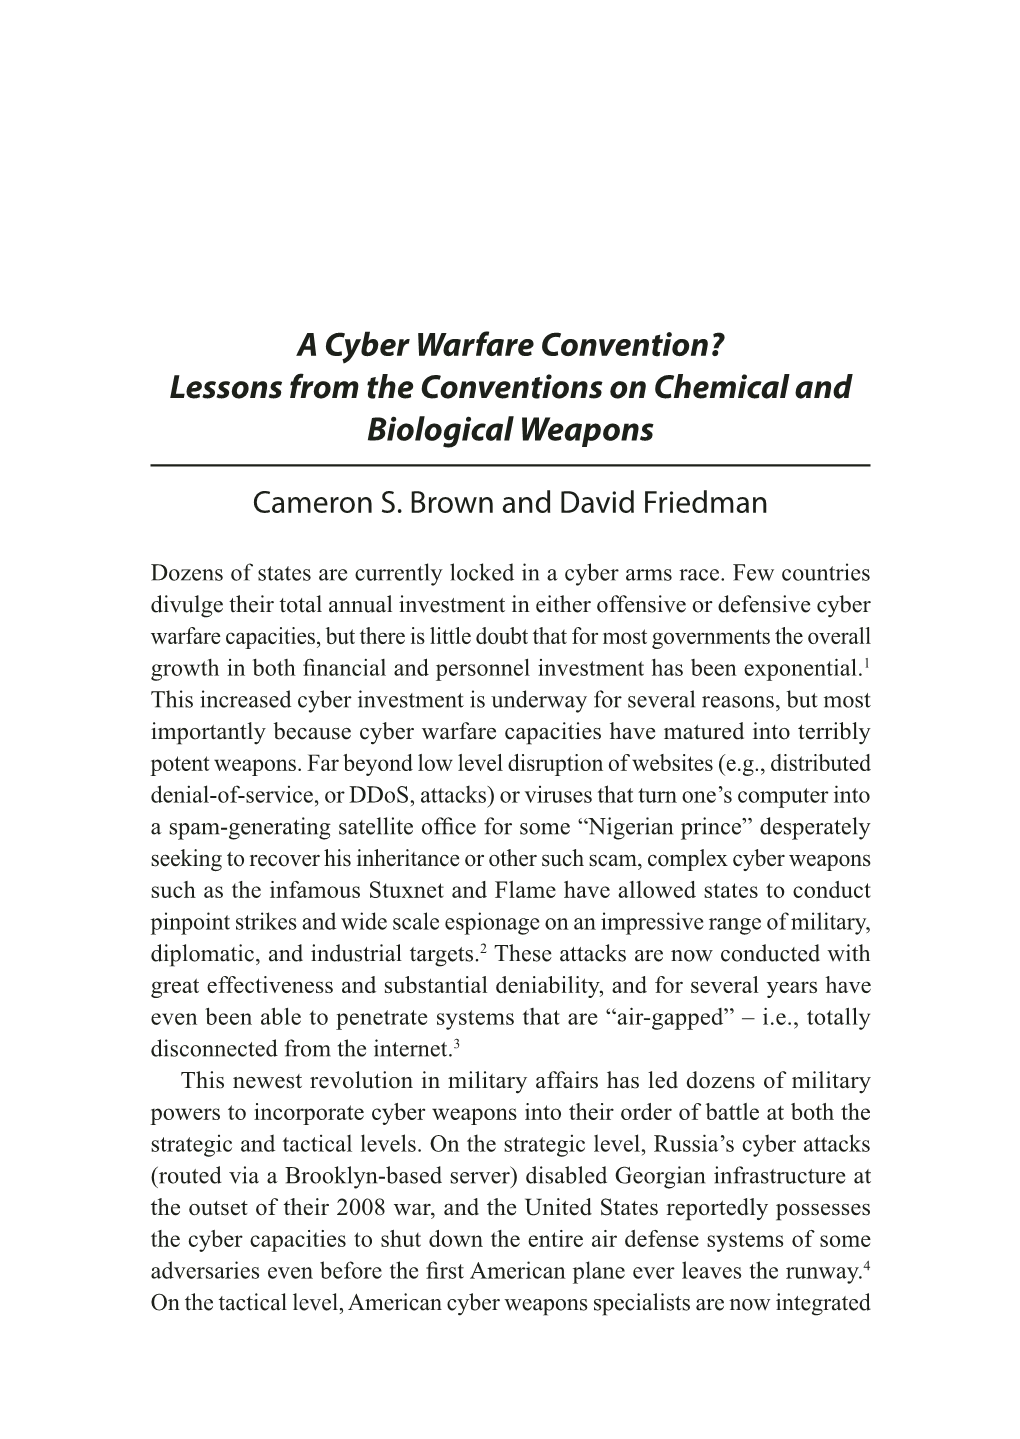 Lessons from the Conventions on Chemical and Biological Weapons